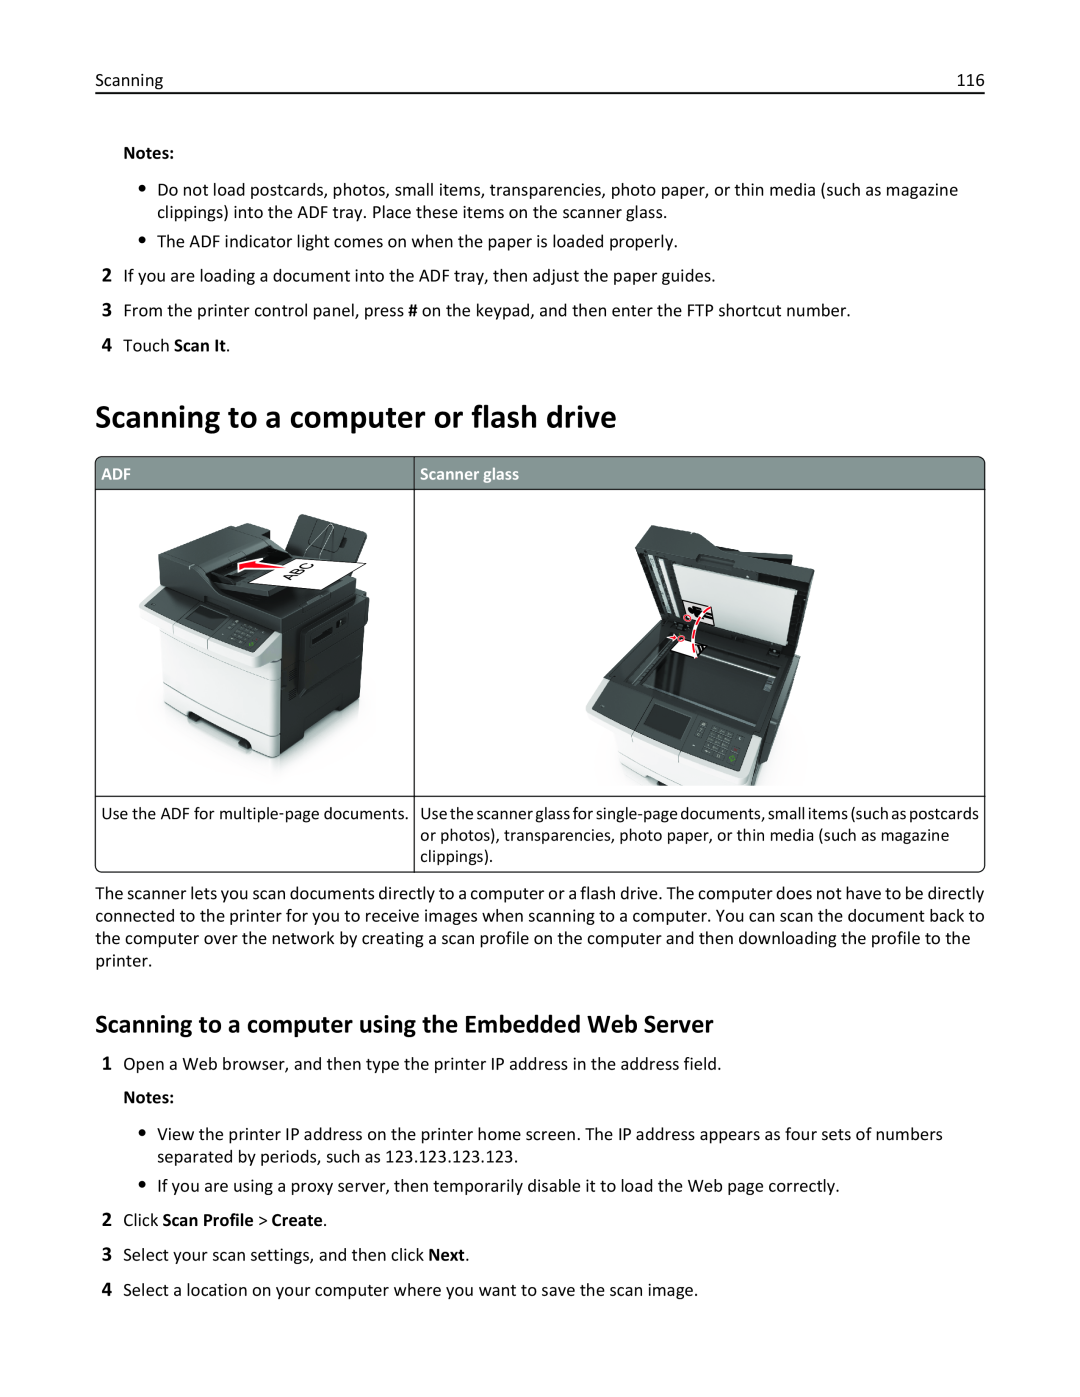 Lexmark 436 manual Scanning to a computer or flash drive, Scanning to a computer using the Embedded Web Server 